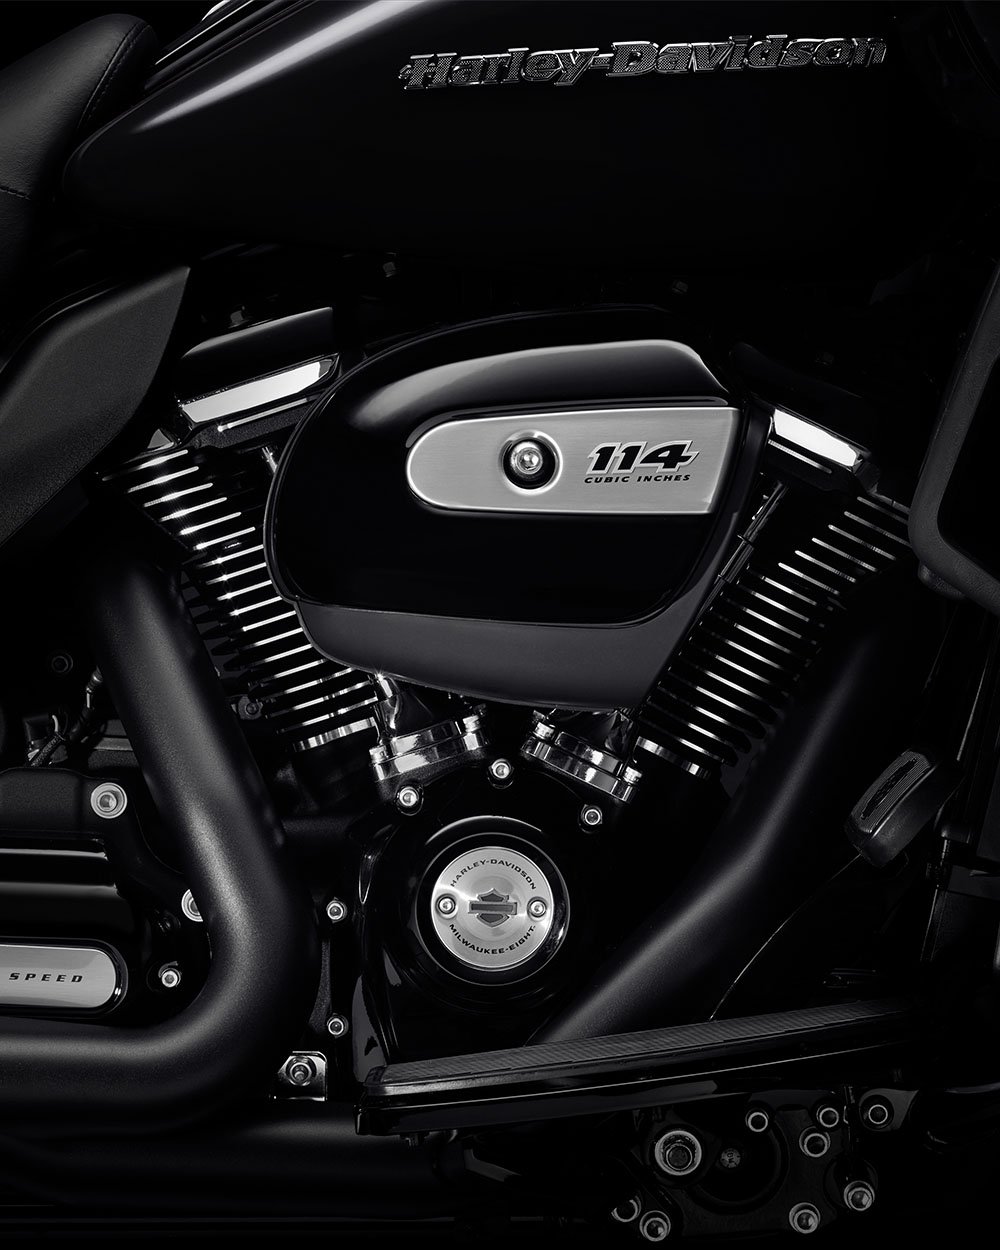 Milwaukee-Eight V-Twin Engine on a 2022 Road Glide motorcycle